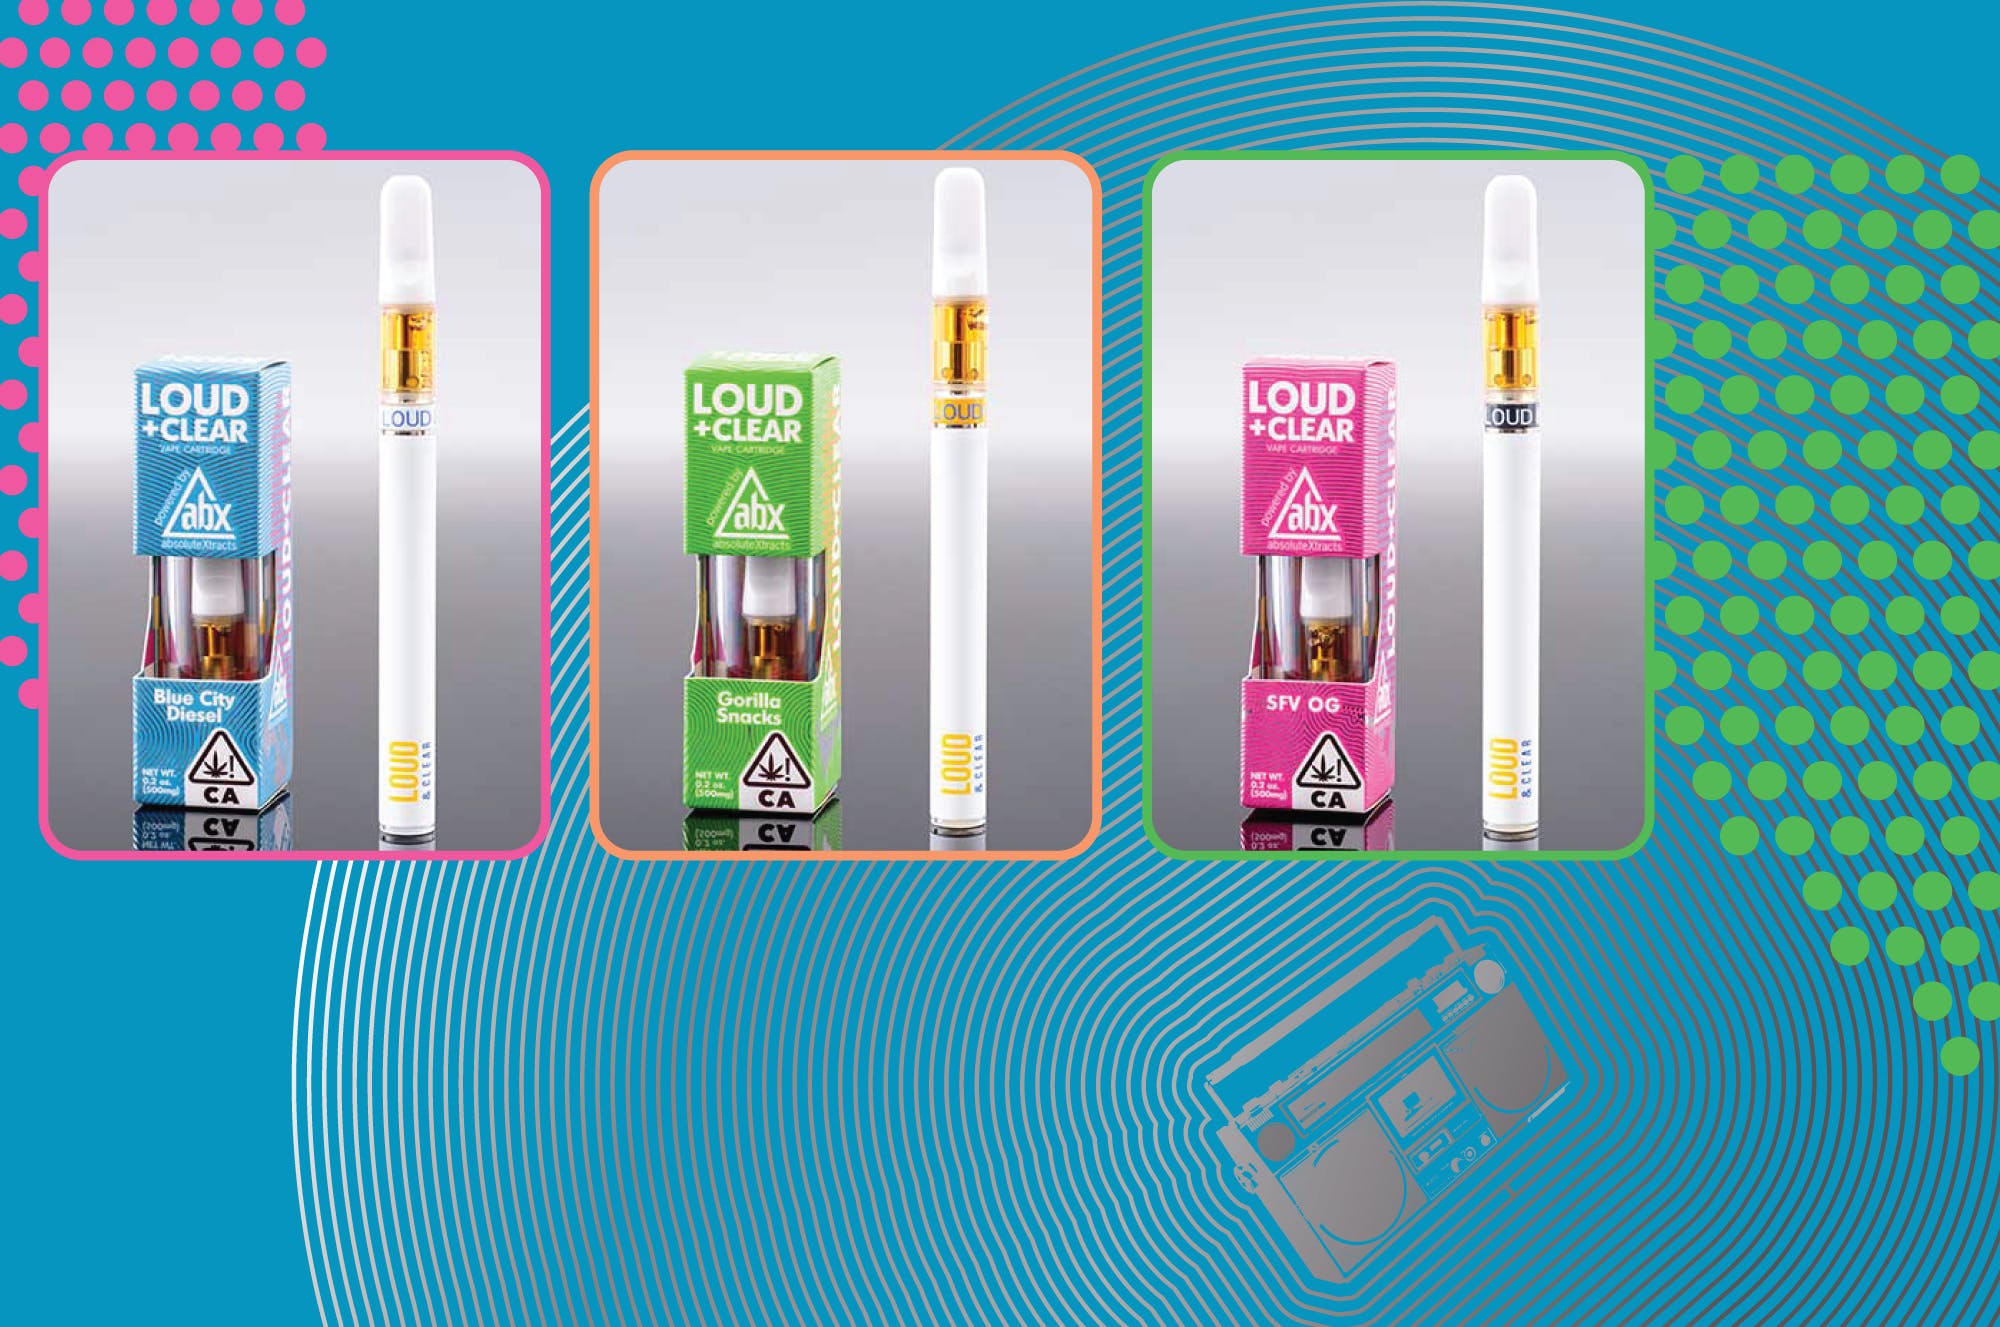 concentrate-loud-and-clear-cartridges-absolute-extracts